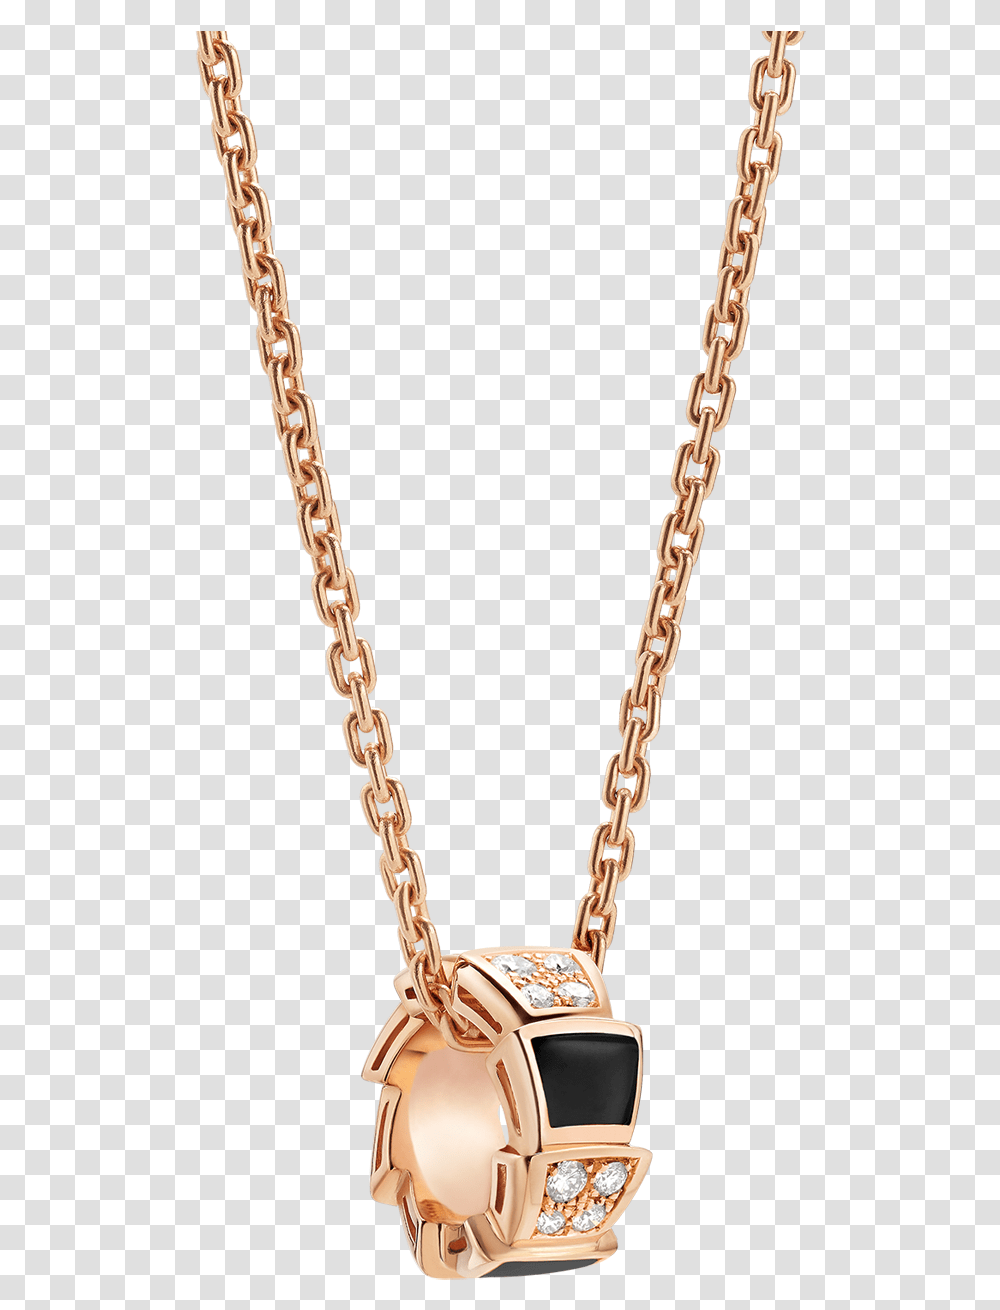 Gold Necklace Bulgari New Serpenti Necklace, Jewelry, Accessories, Accessory, Chain Transparent Png